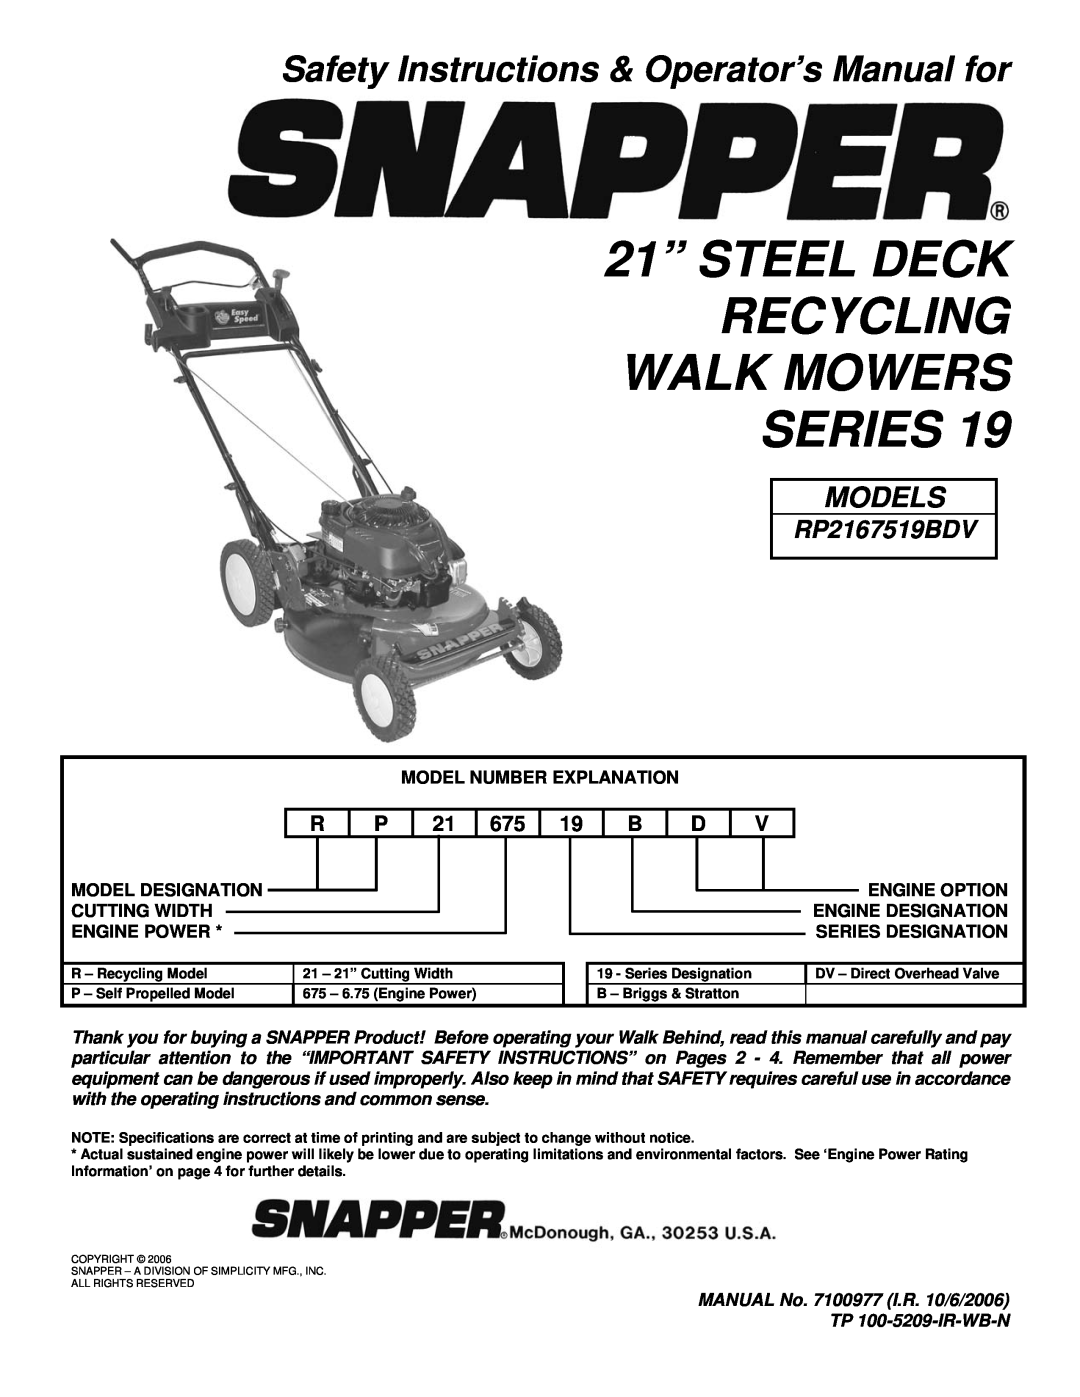 Snapper RP2167519BDV important safety instructions 21” STEEL DECK RECYCLING WALK MOWERS SERIES, Models 